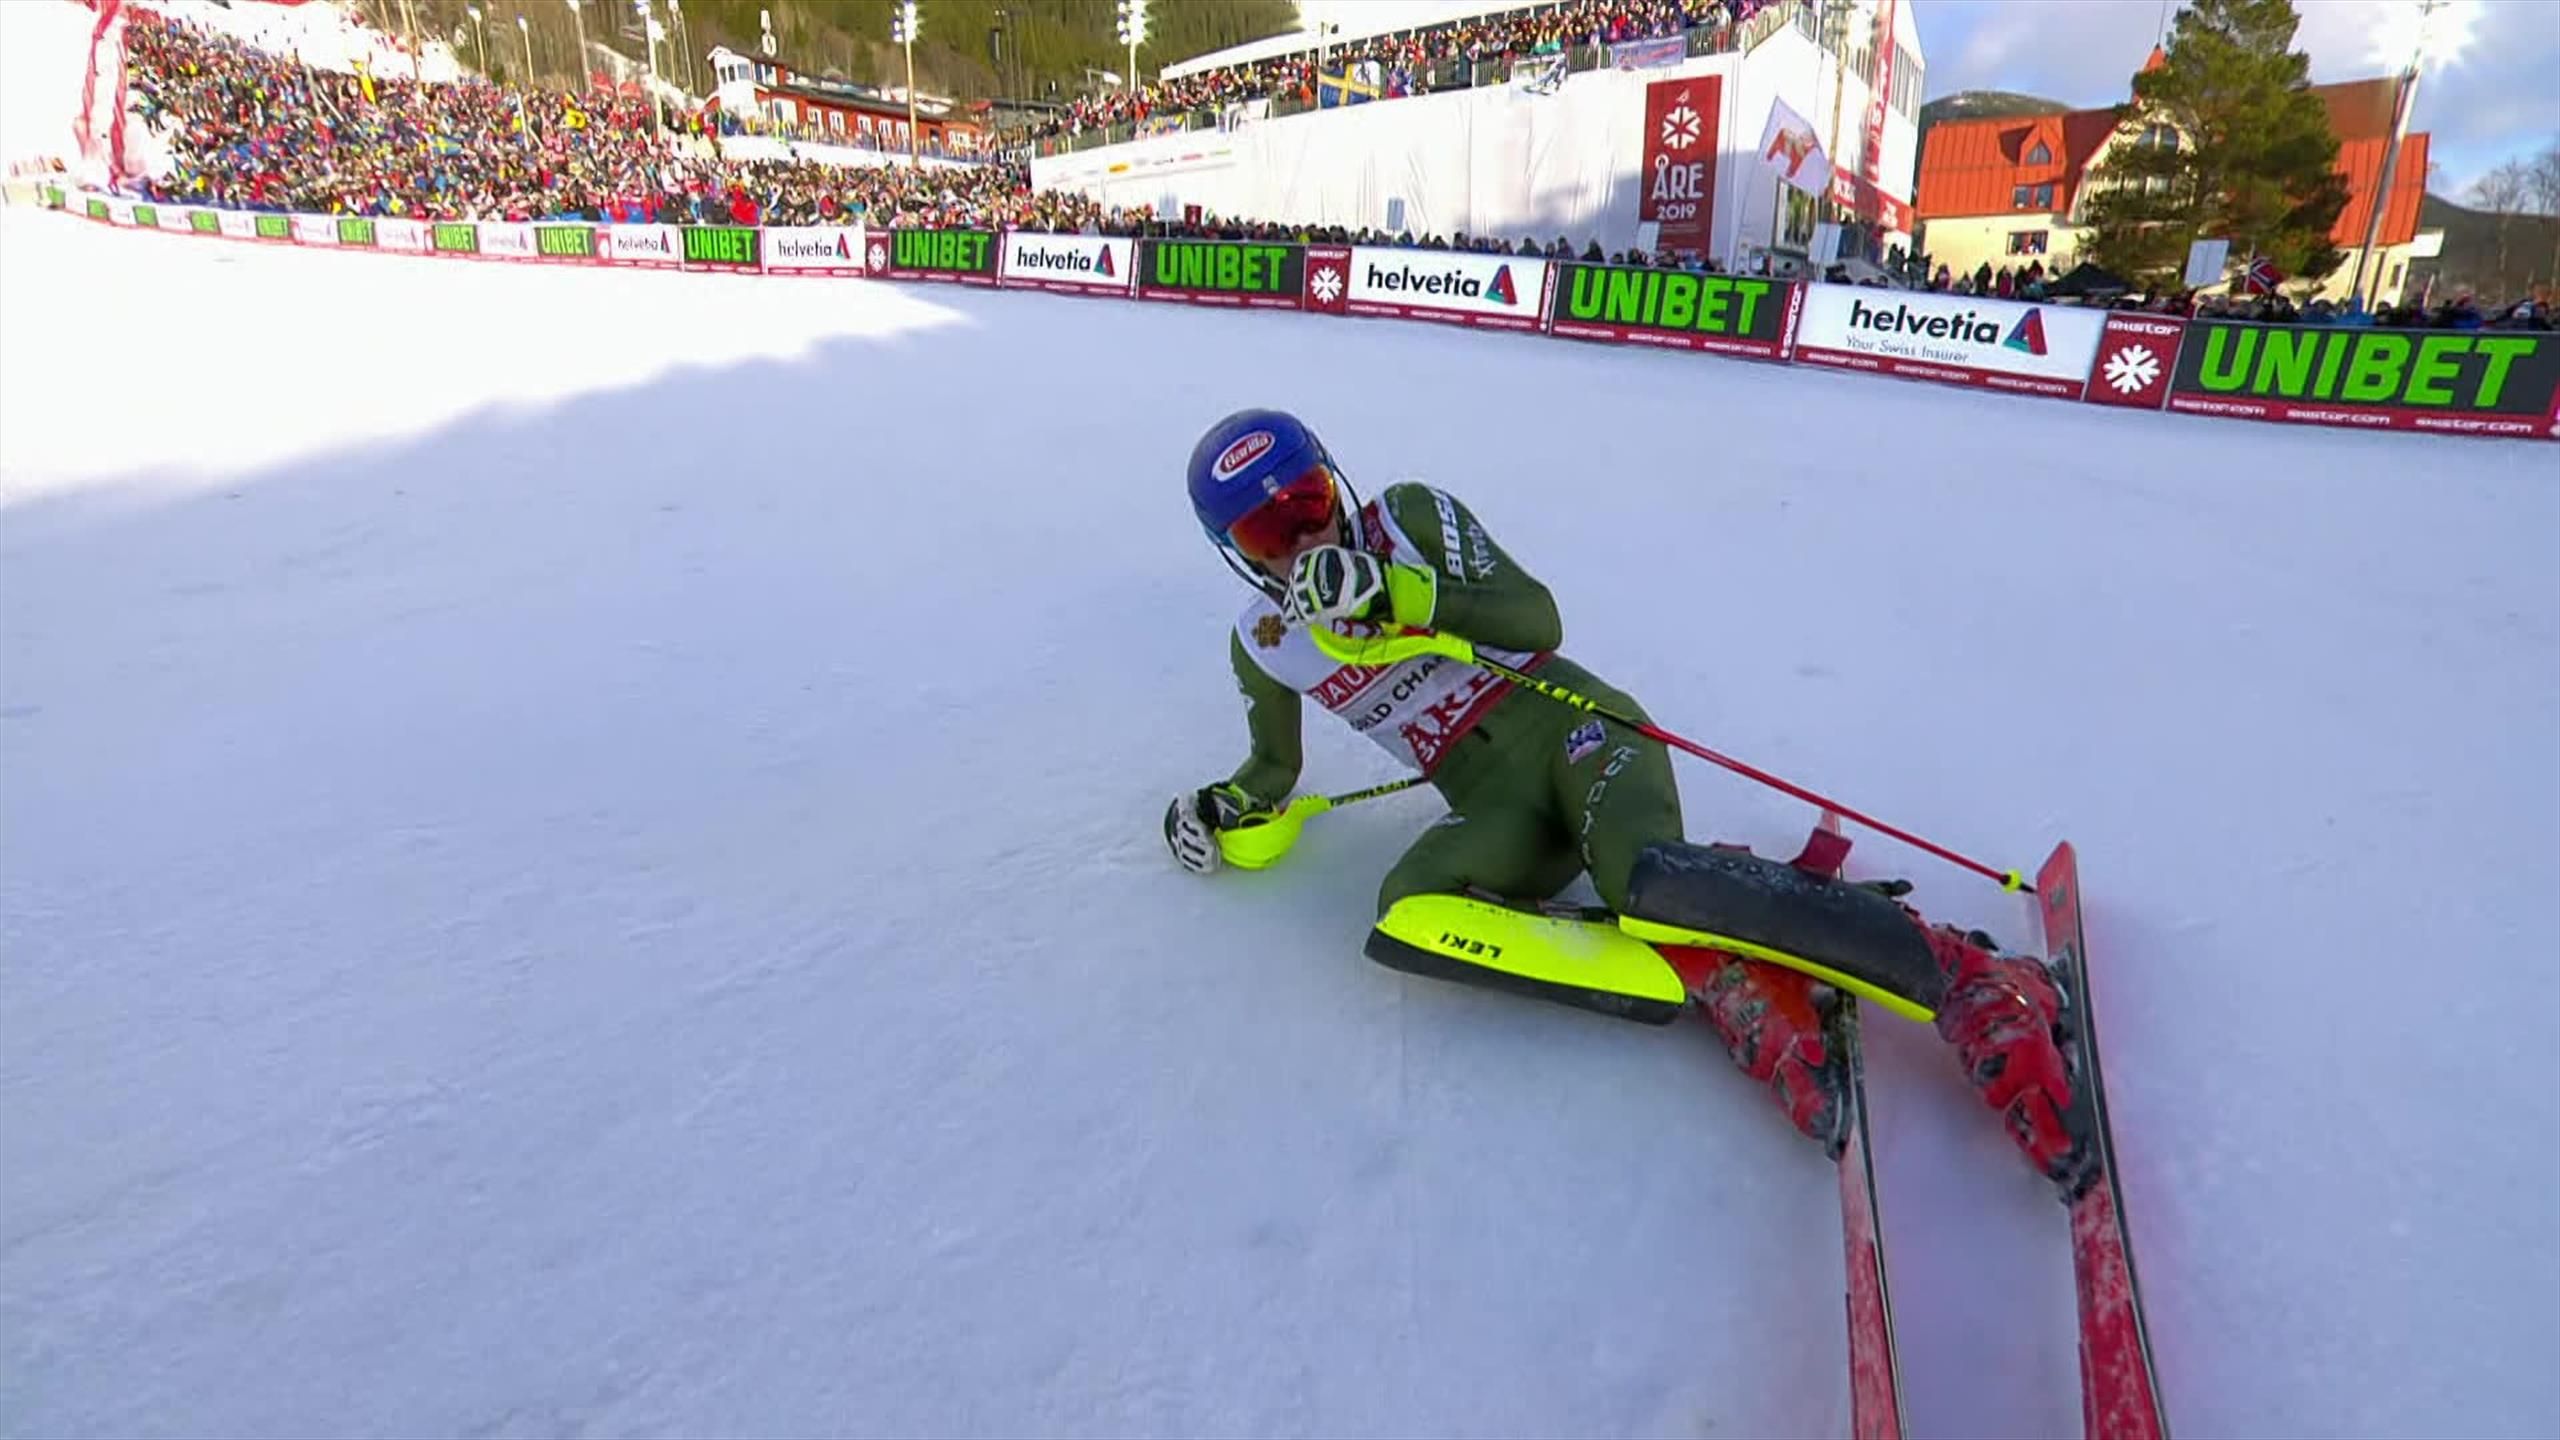 Alpine skiing video - Breathtaking! - See the run which delivered world slalom title for Shiffrin - Alpine Skiing video